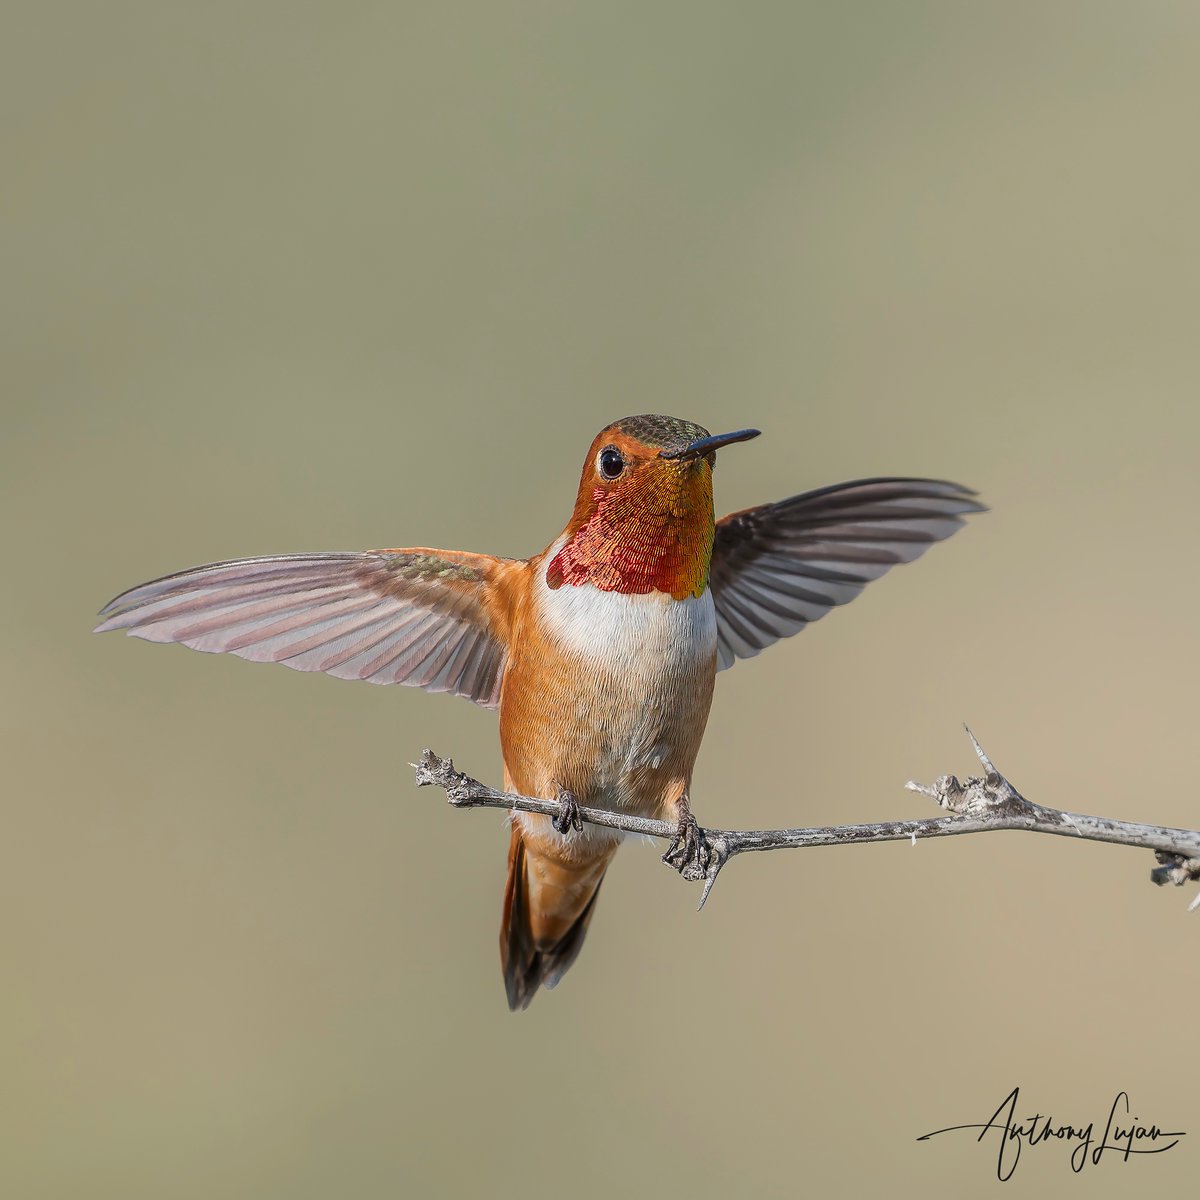 They're still in my backyard! I can't believe how long they are staying. I'm going to charge them rent soon! So blessed to have them! Rufous Hummingbird Selasphorus rufus IUCN status - NEAR THREATENED Sony A1 - Sony 600mm #rufousshummingbird #hummingbird #colibrí #beijaflor...